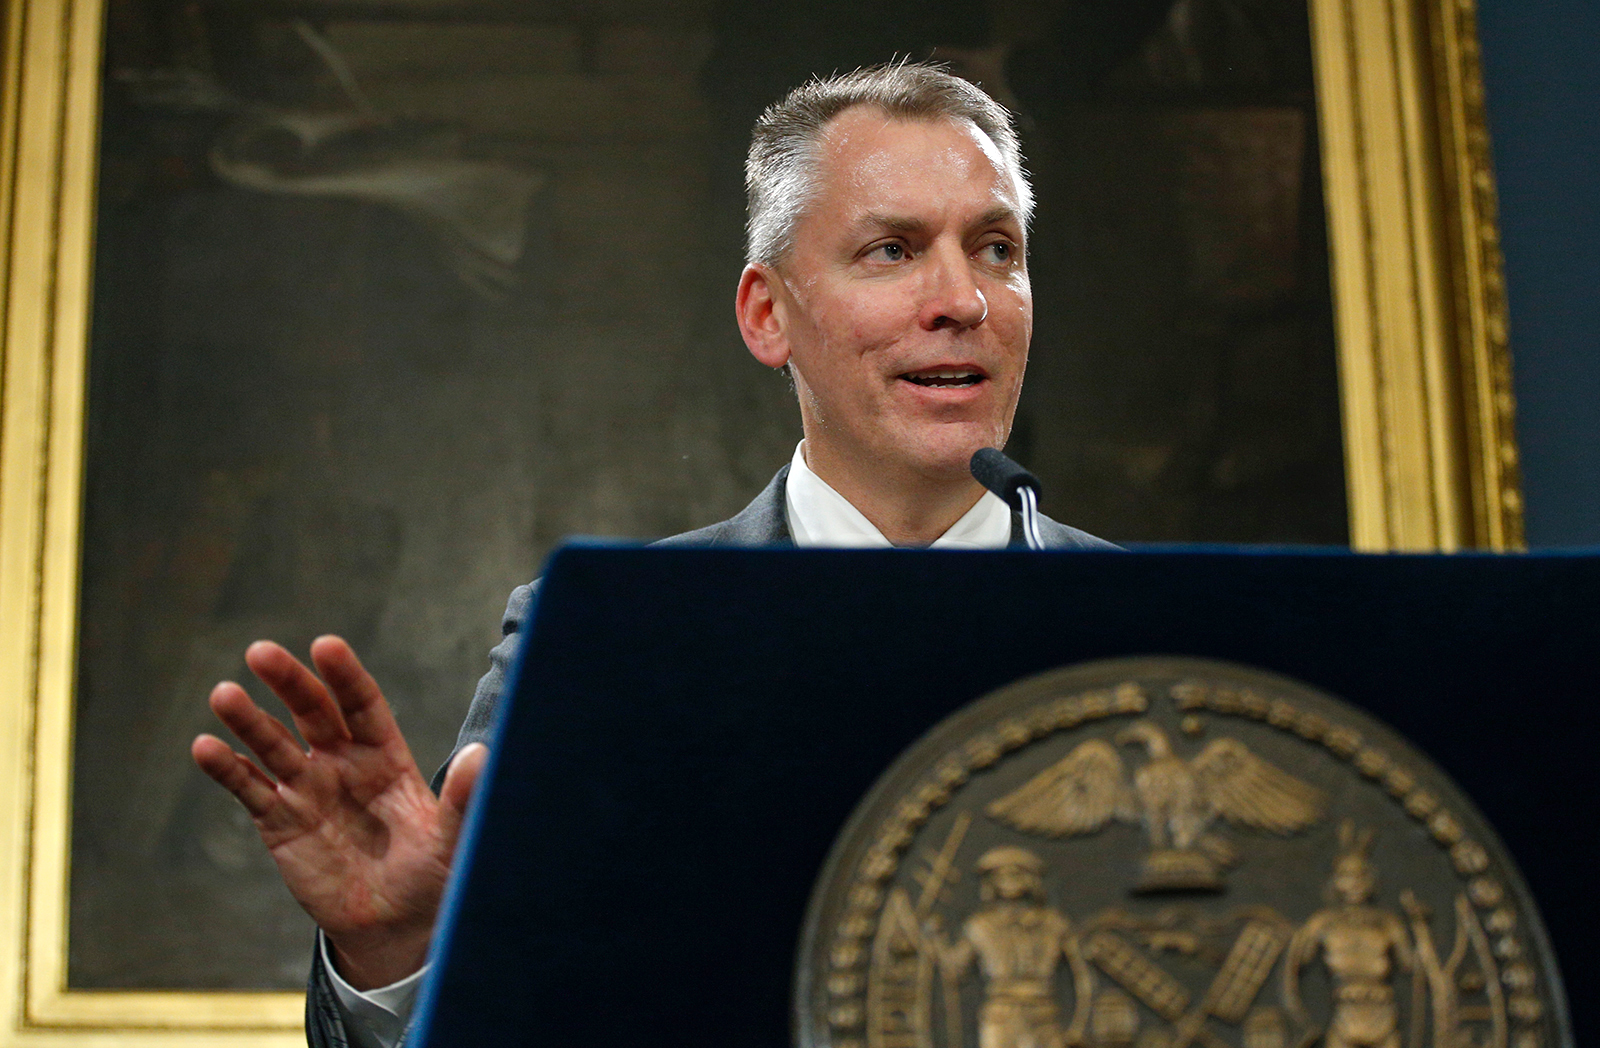 Dermot Shea speaks during a press conference on November 4, 2019 announcing that he will be the new NYPD Commissioner in New York City.